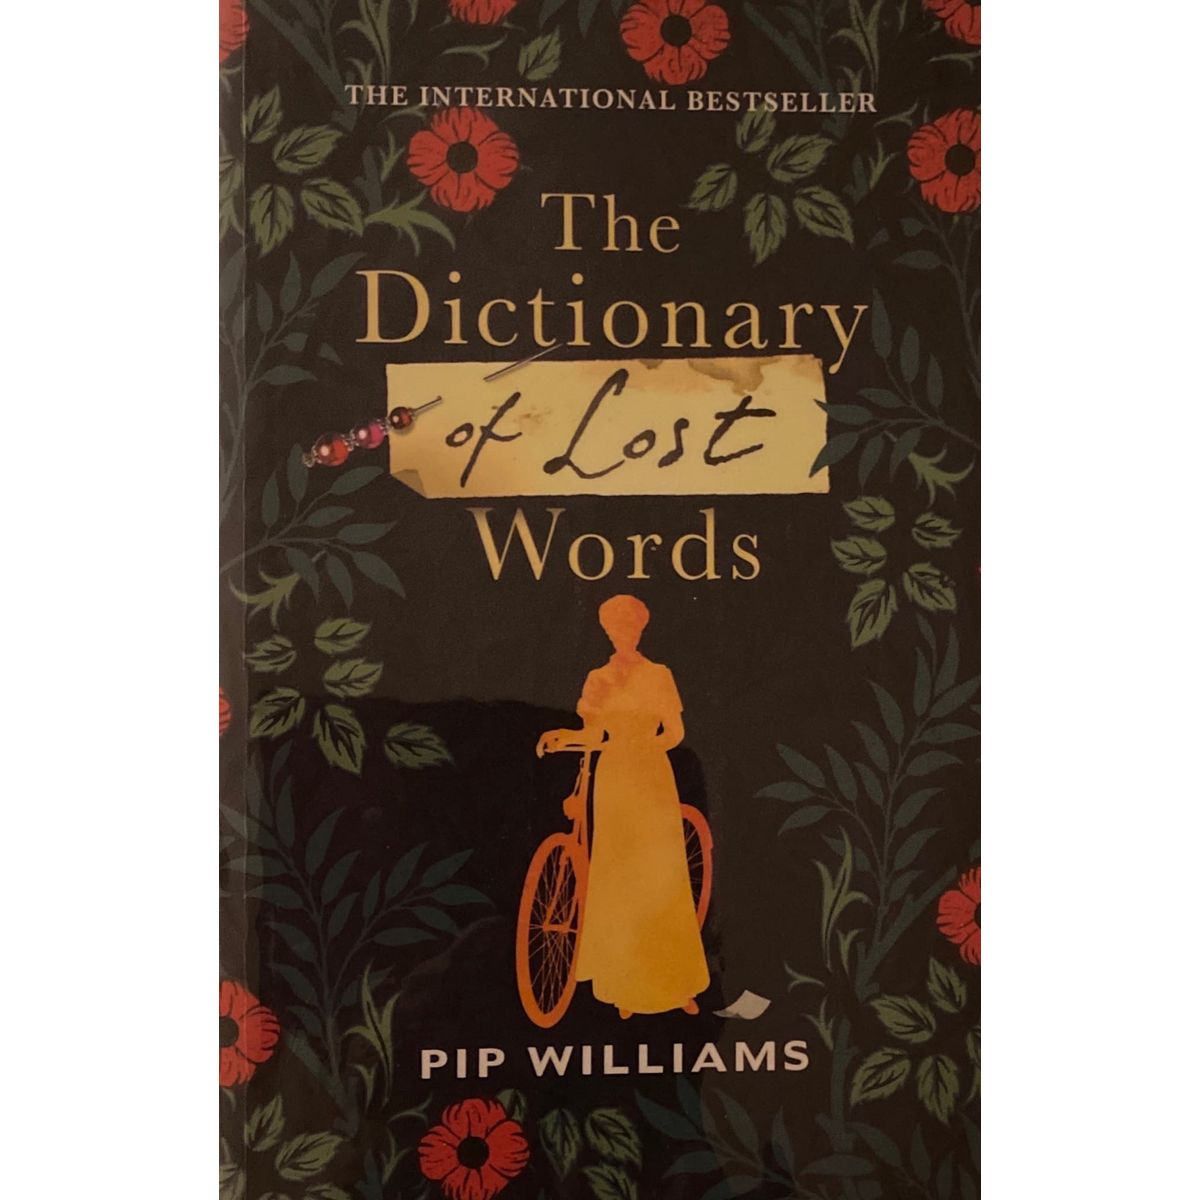 ISBN: 9781784743871 / 1784743879 - The Dictionary of Lost Words by Pip Williams [2021]